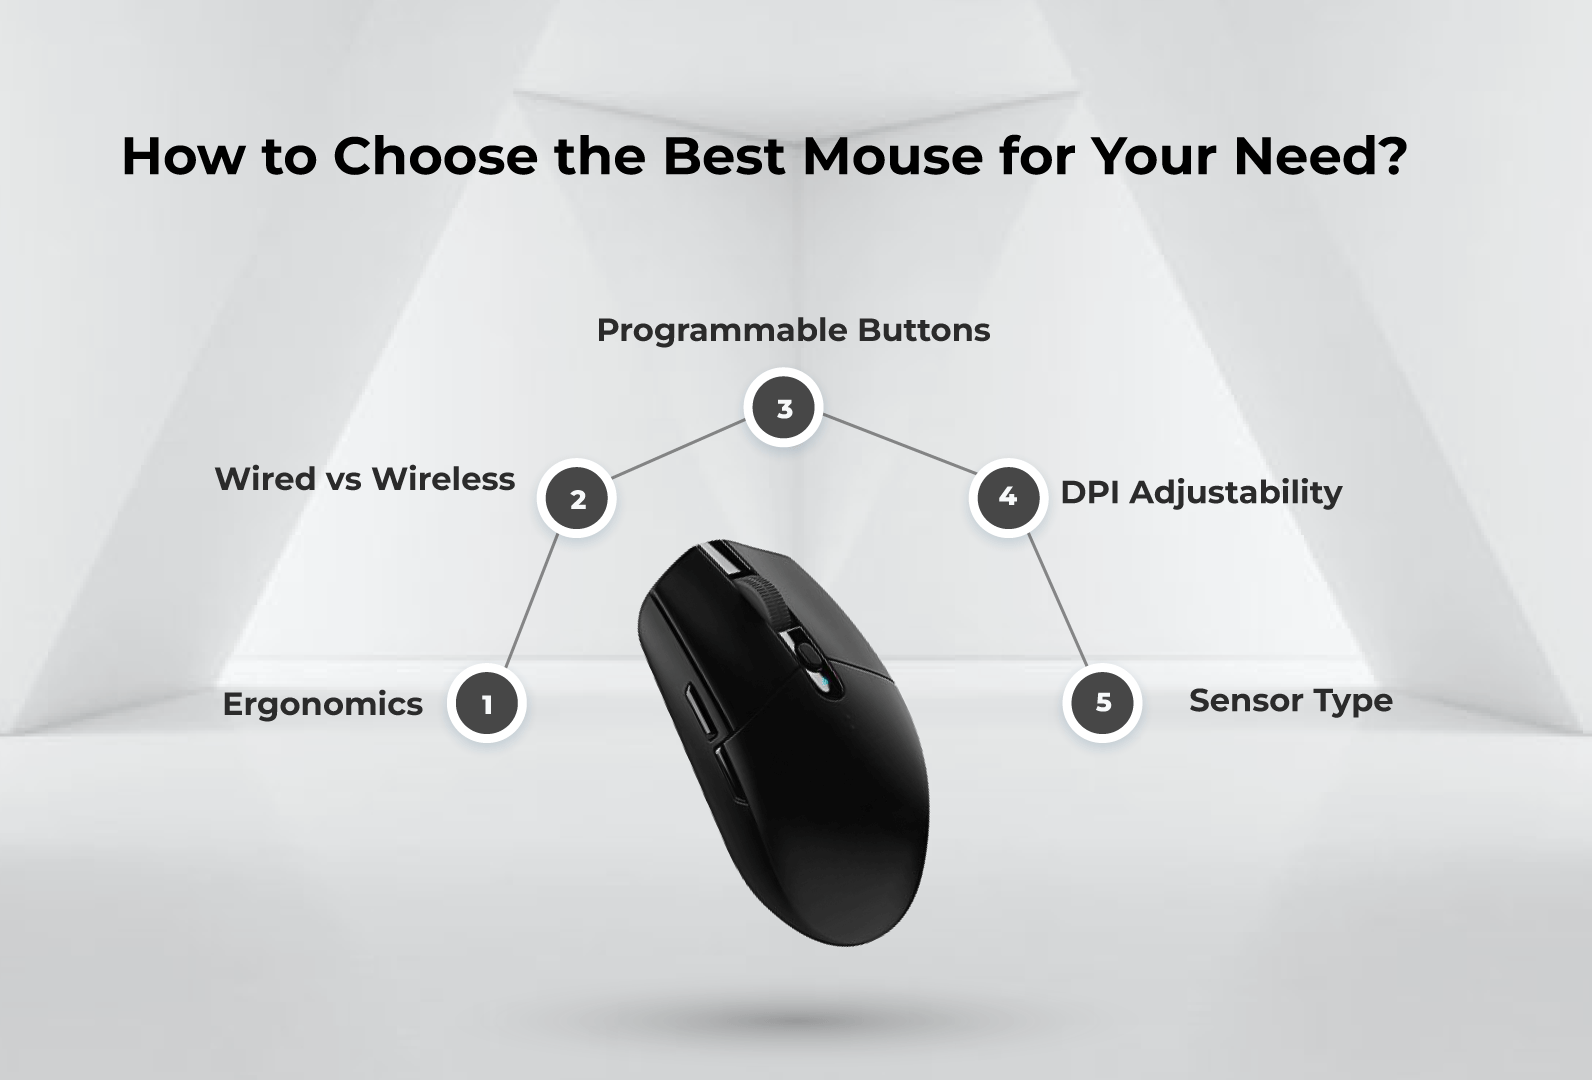 How to Choose the Best Mouse for Your Need?